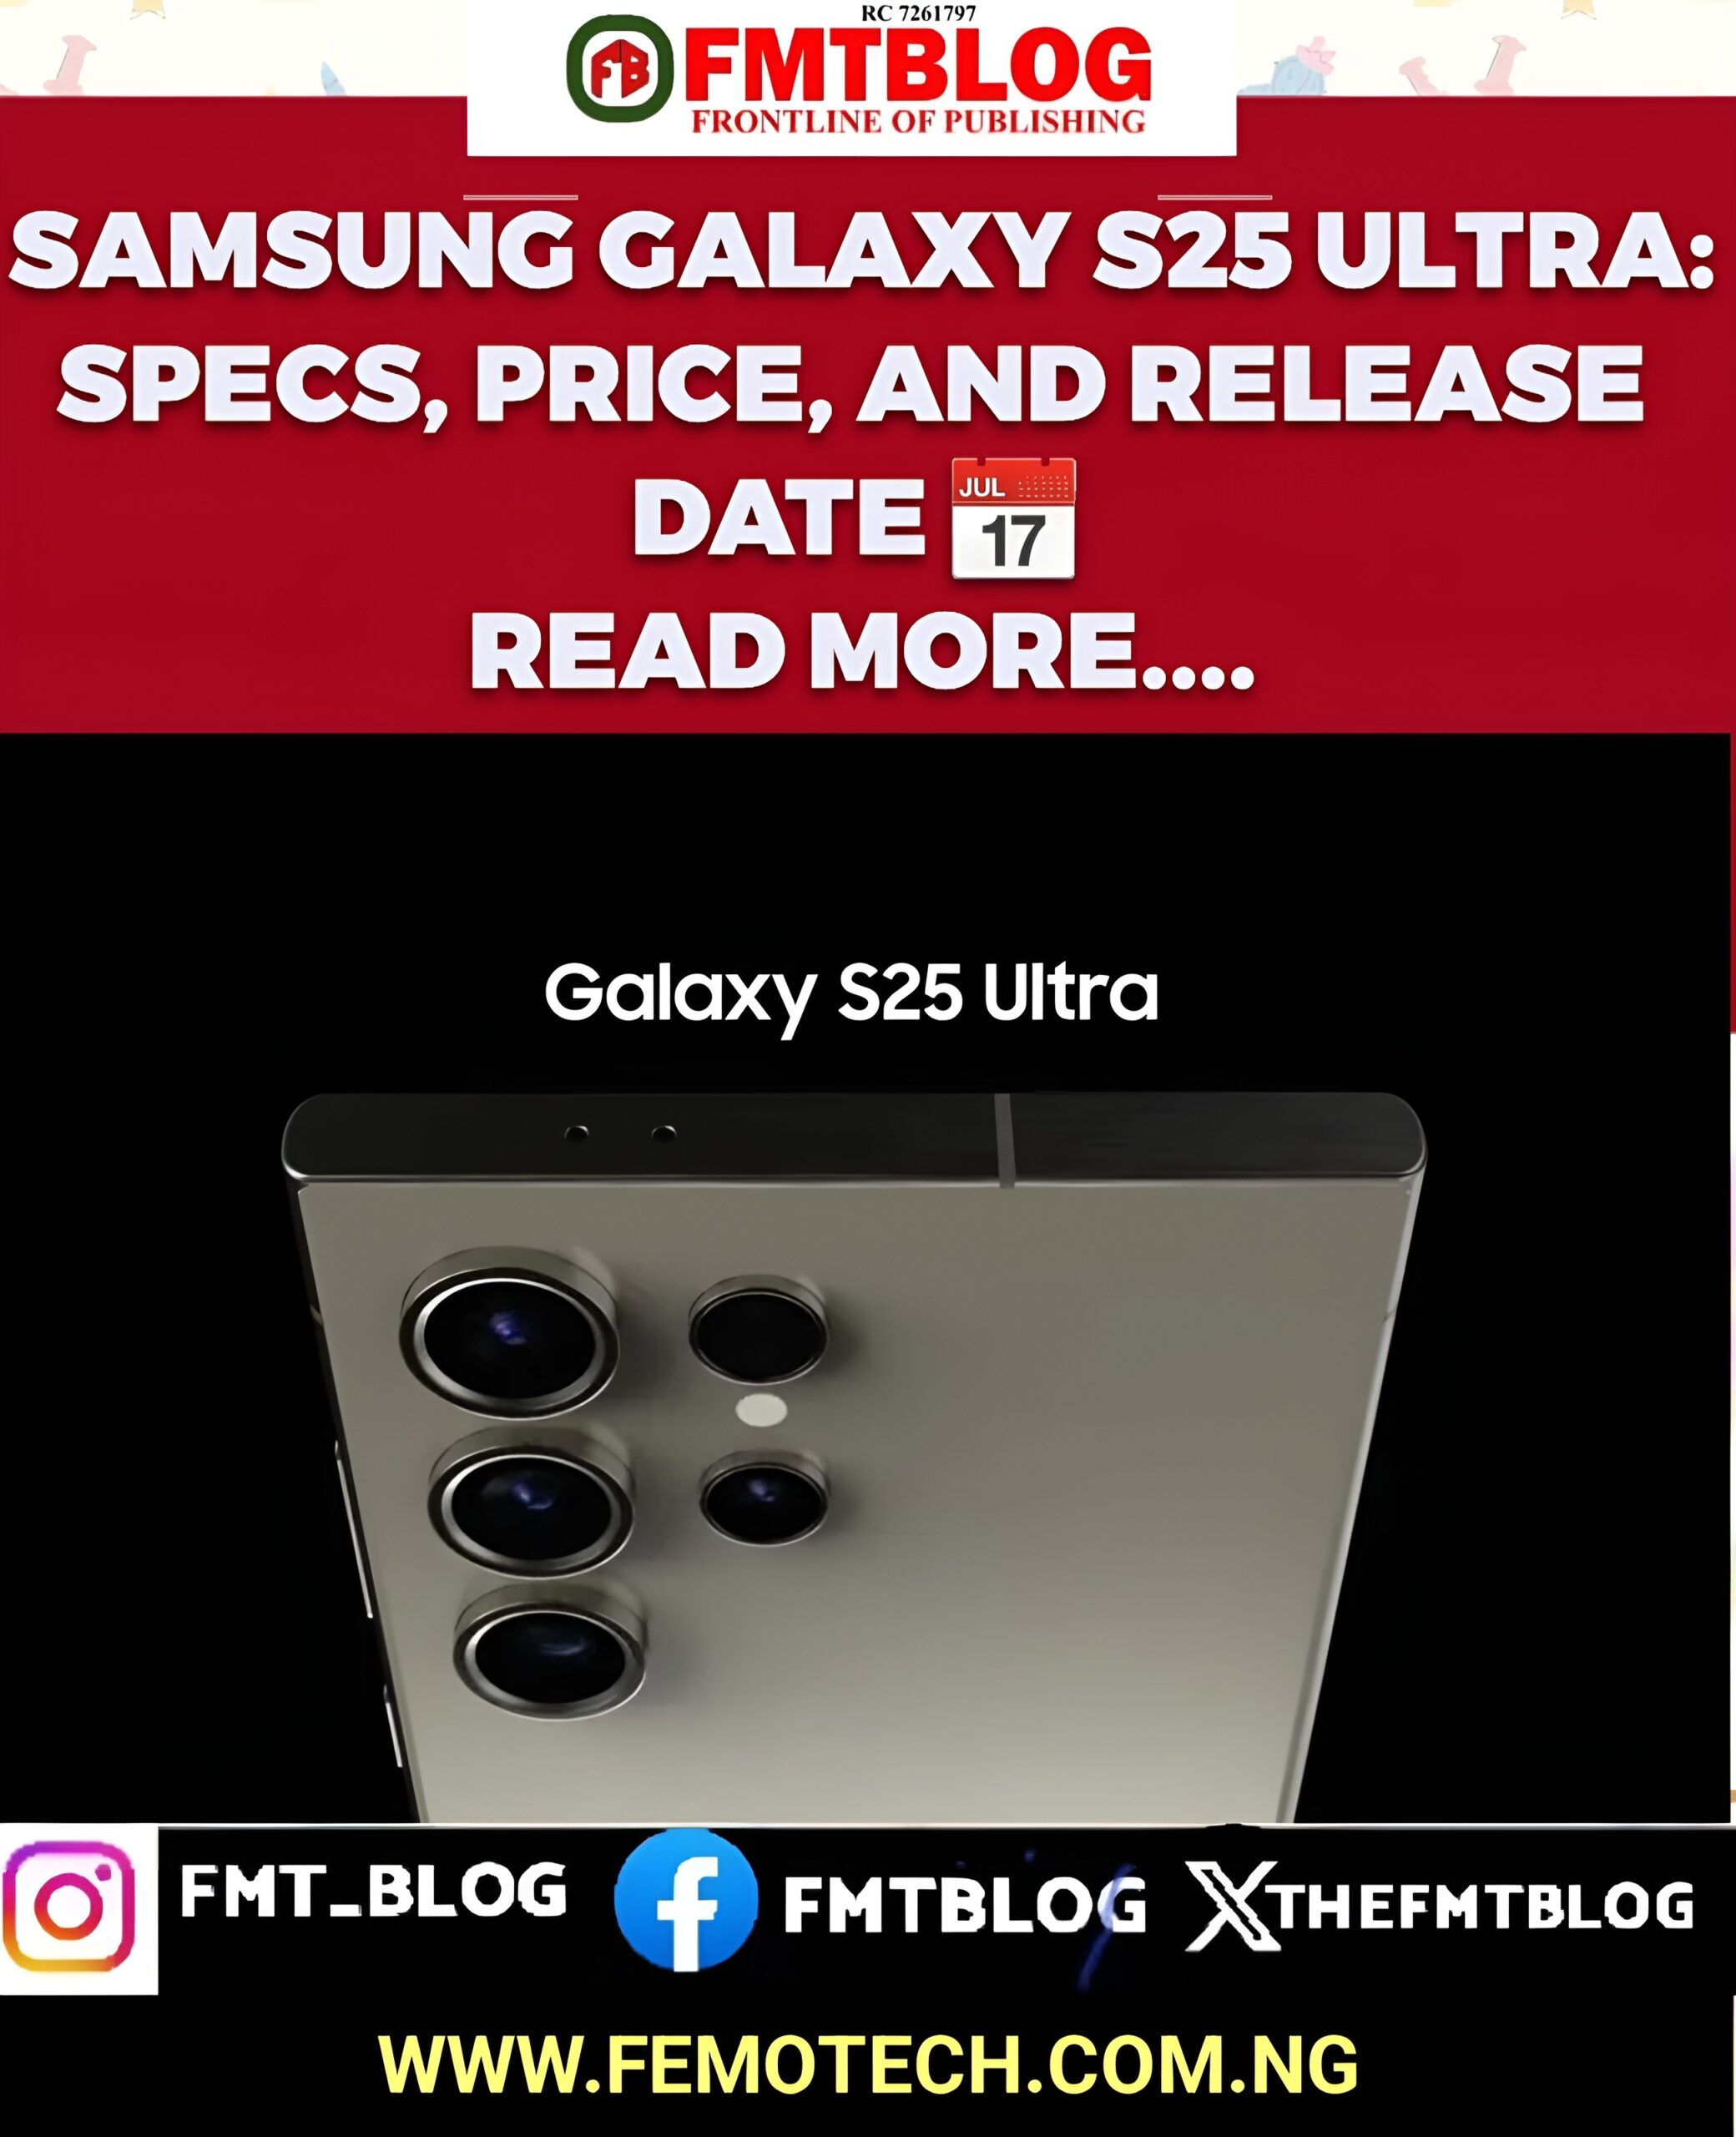 Samsung Galaxy S25 Ultra: Specs, Price,And Release Date